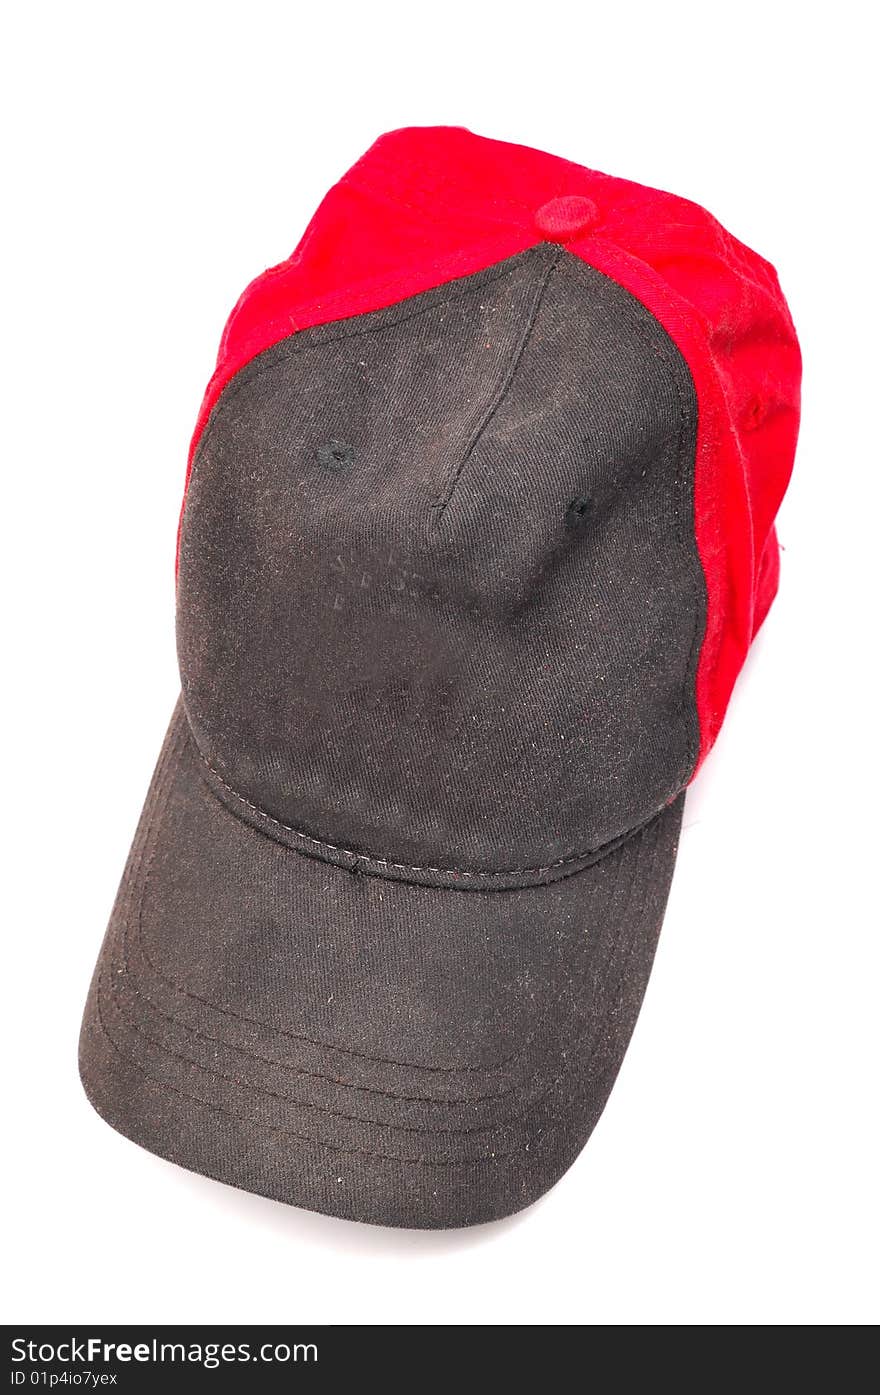 Black and red cap isolated on white background. Black and red cap isolated on white background.